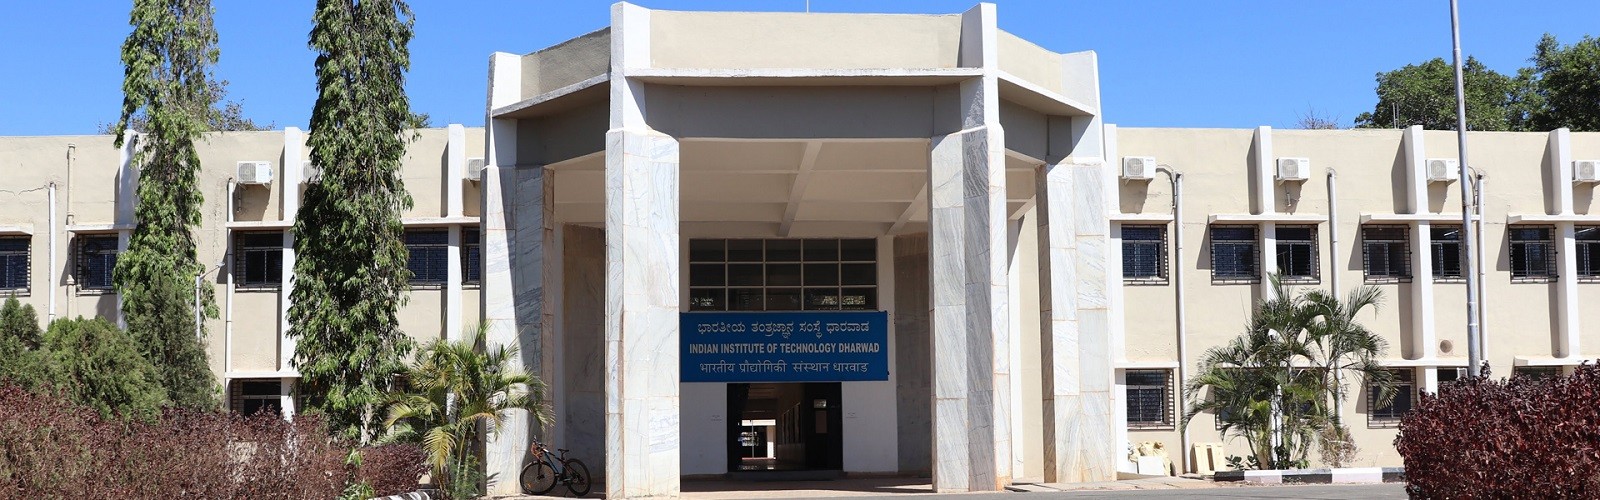 Indian Institute of Technology Dharwad